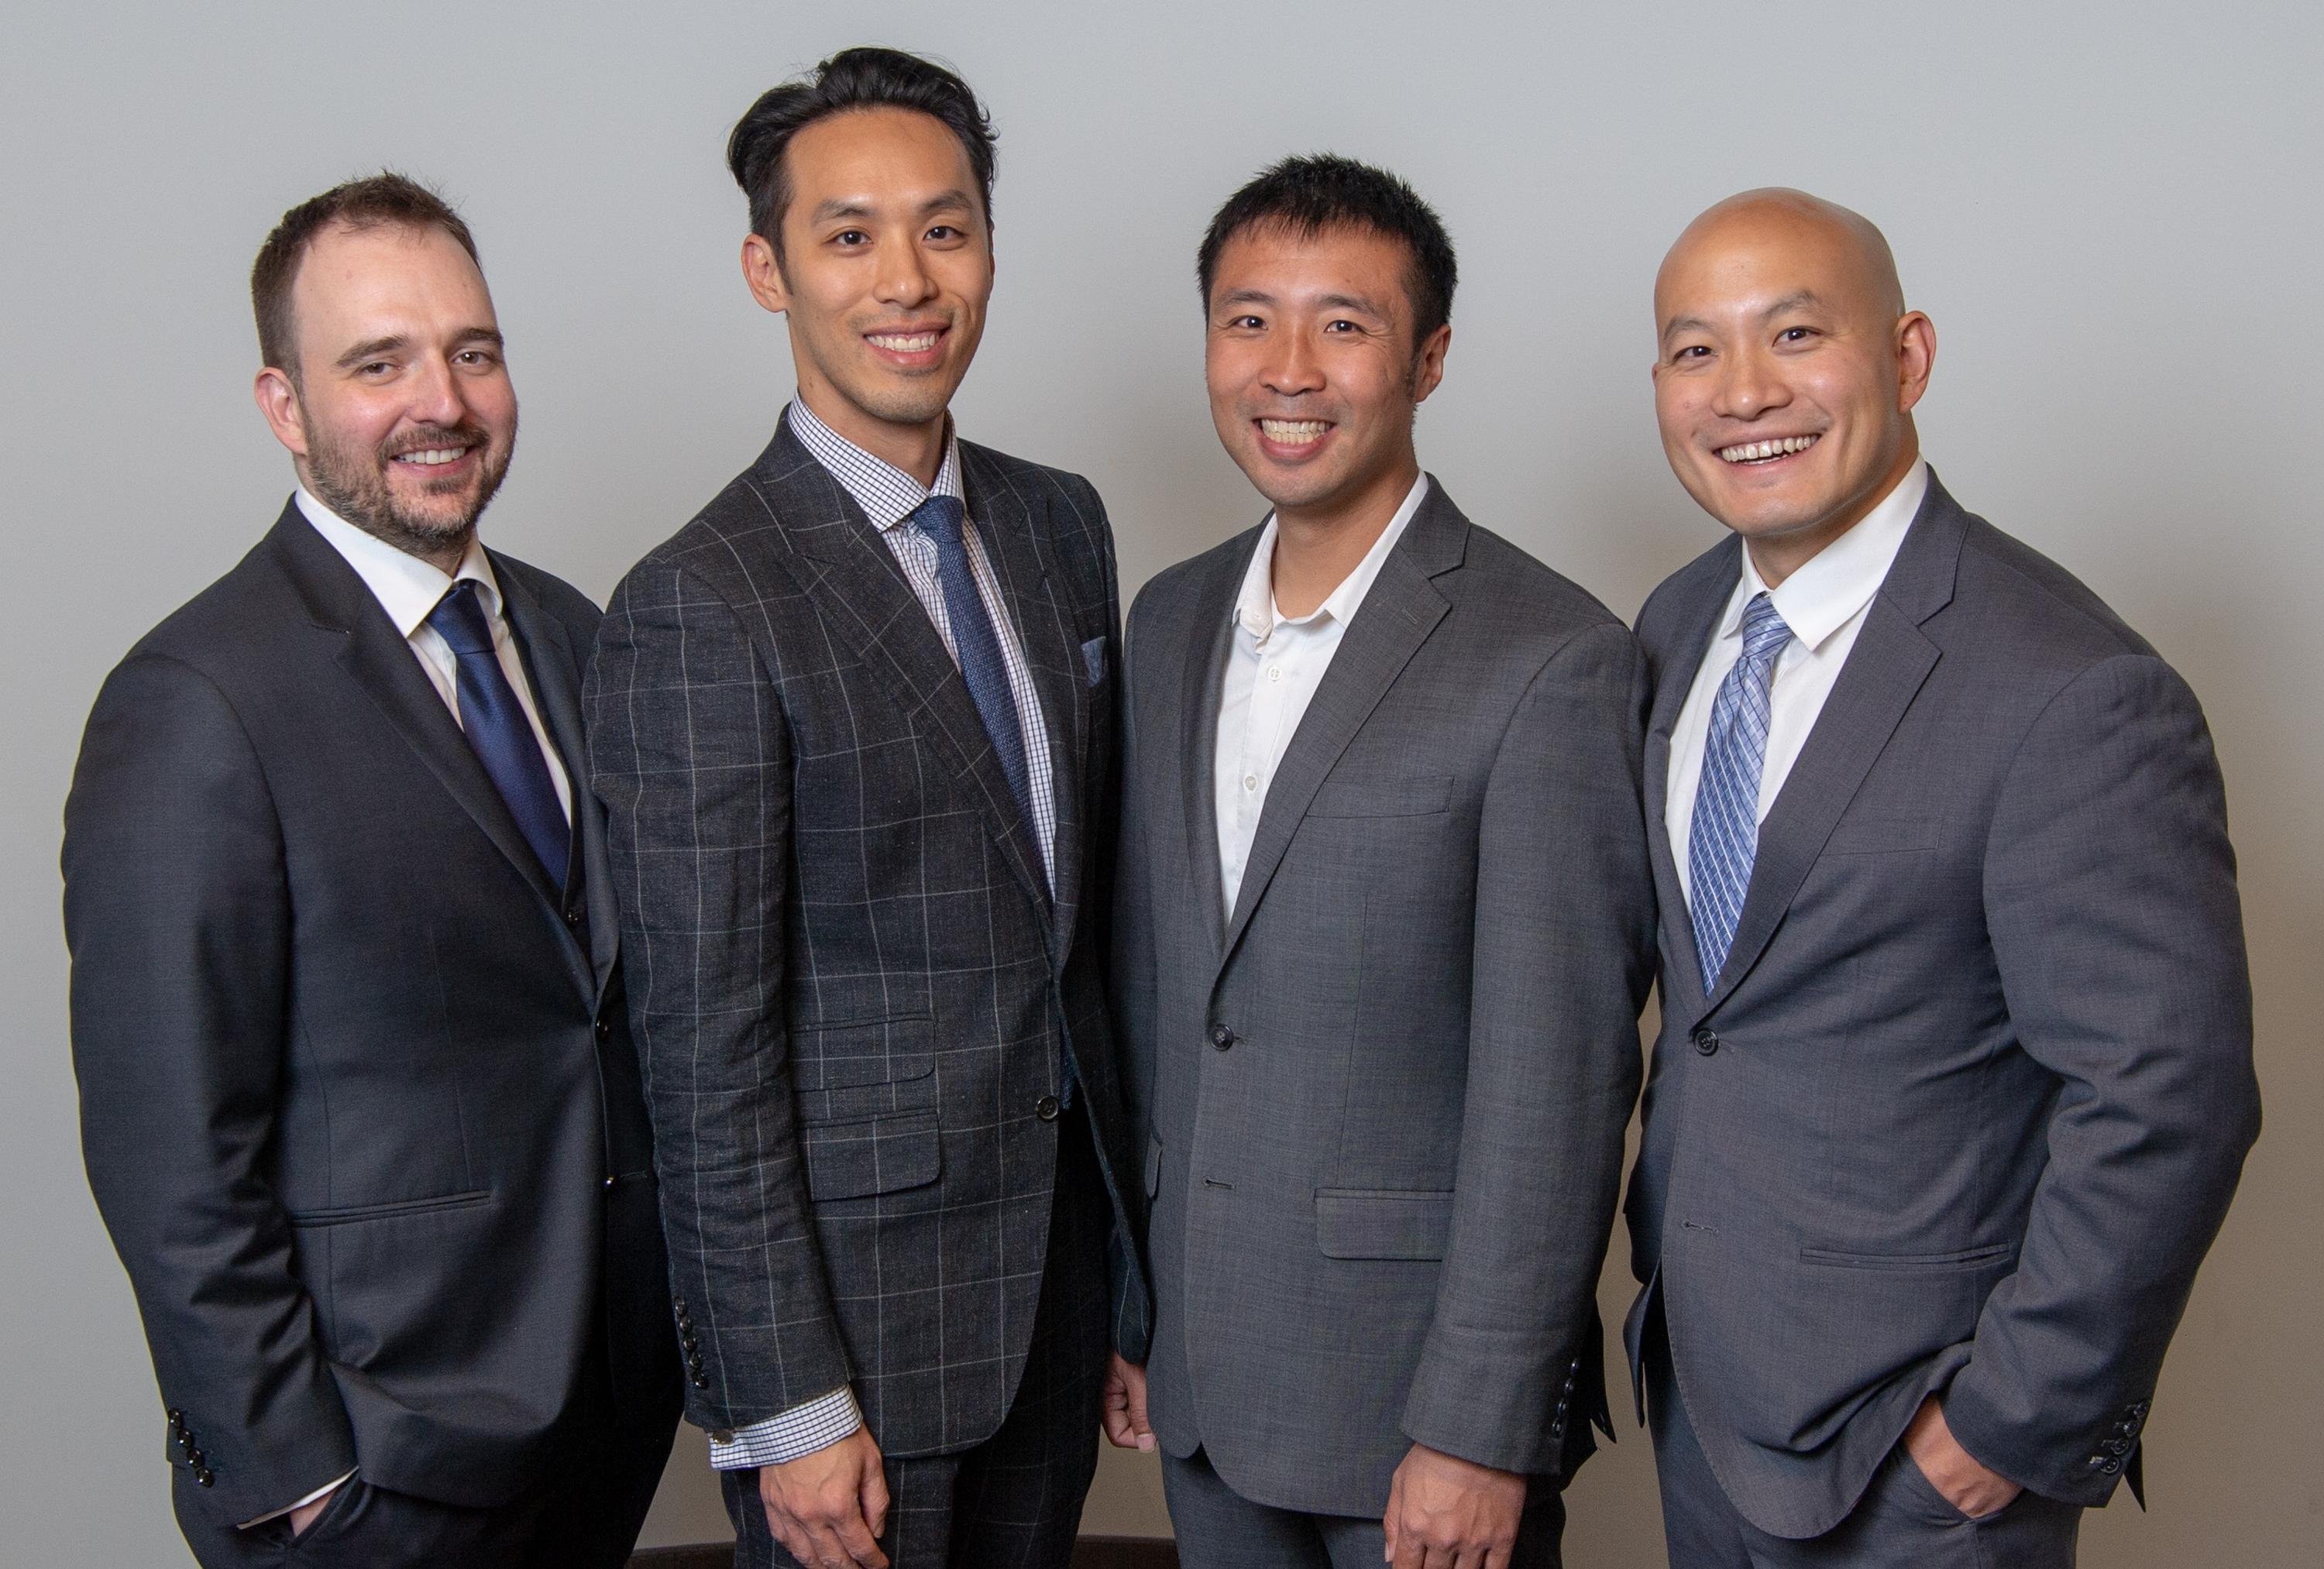 Flipp Corporation founders (left to right) David Meyers, David Au-Yeung, Matthew Cheung and Wehuns Tan at the 2018 Awards Dinner.